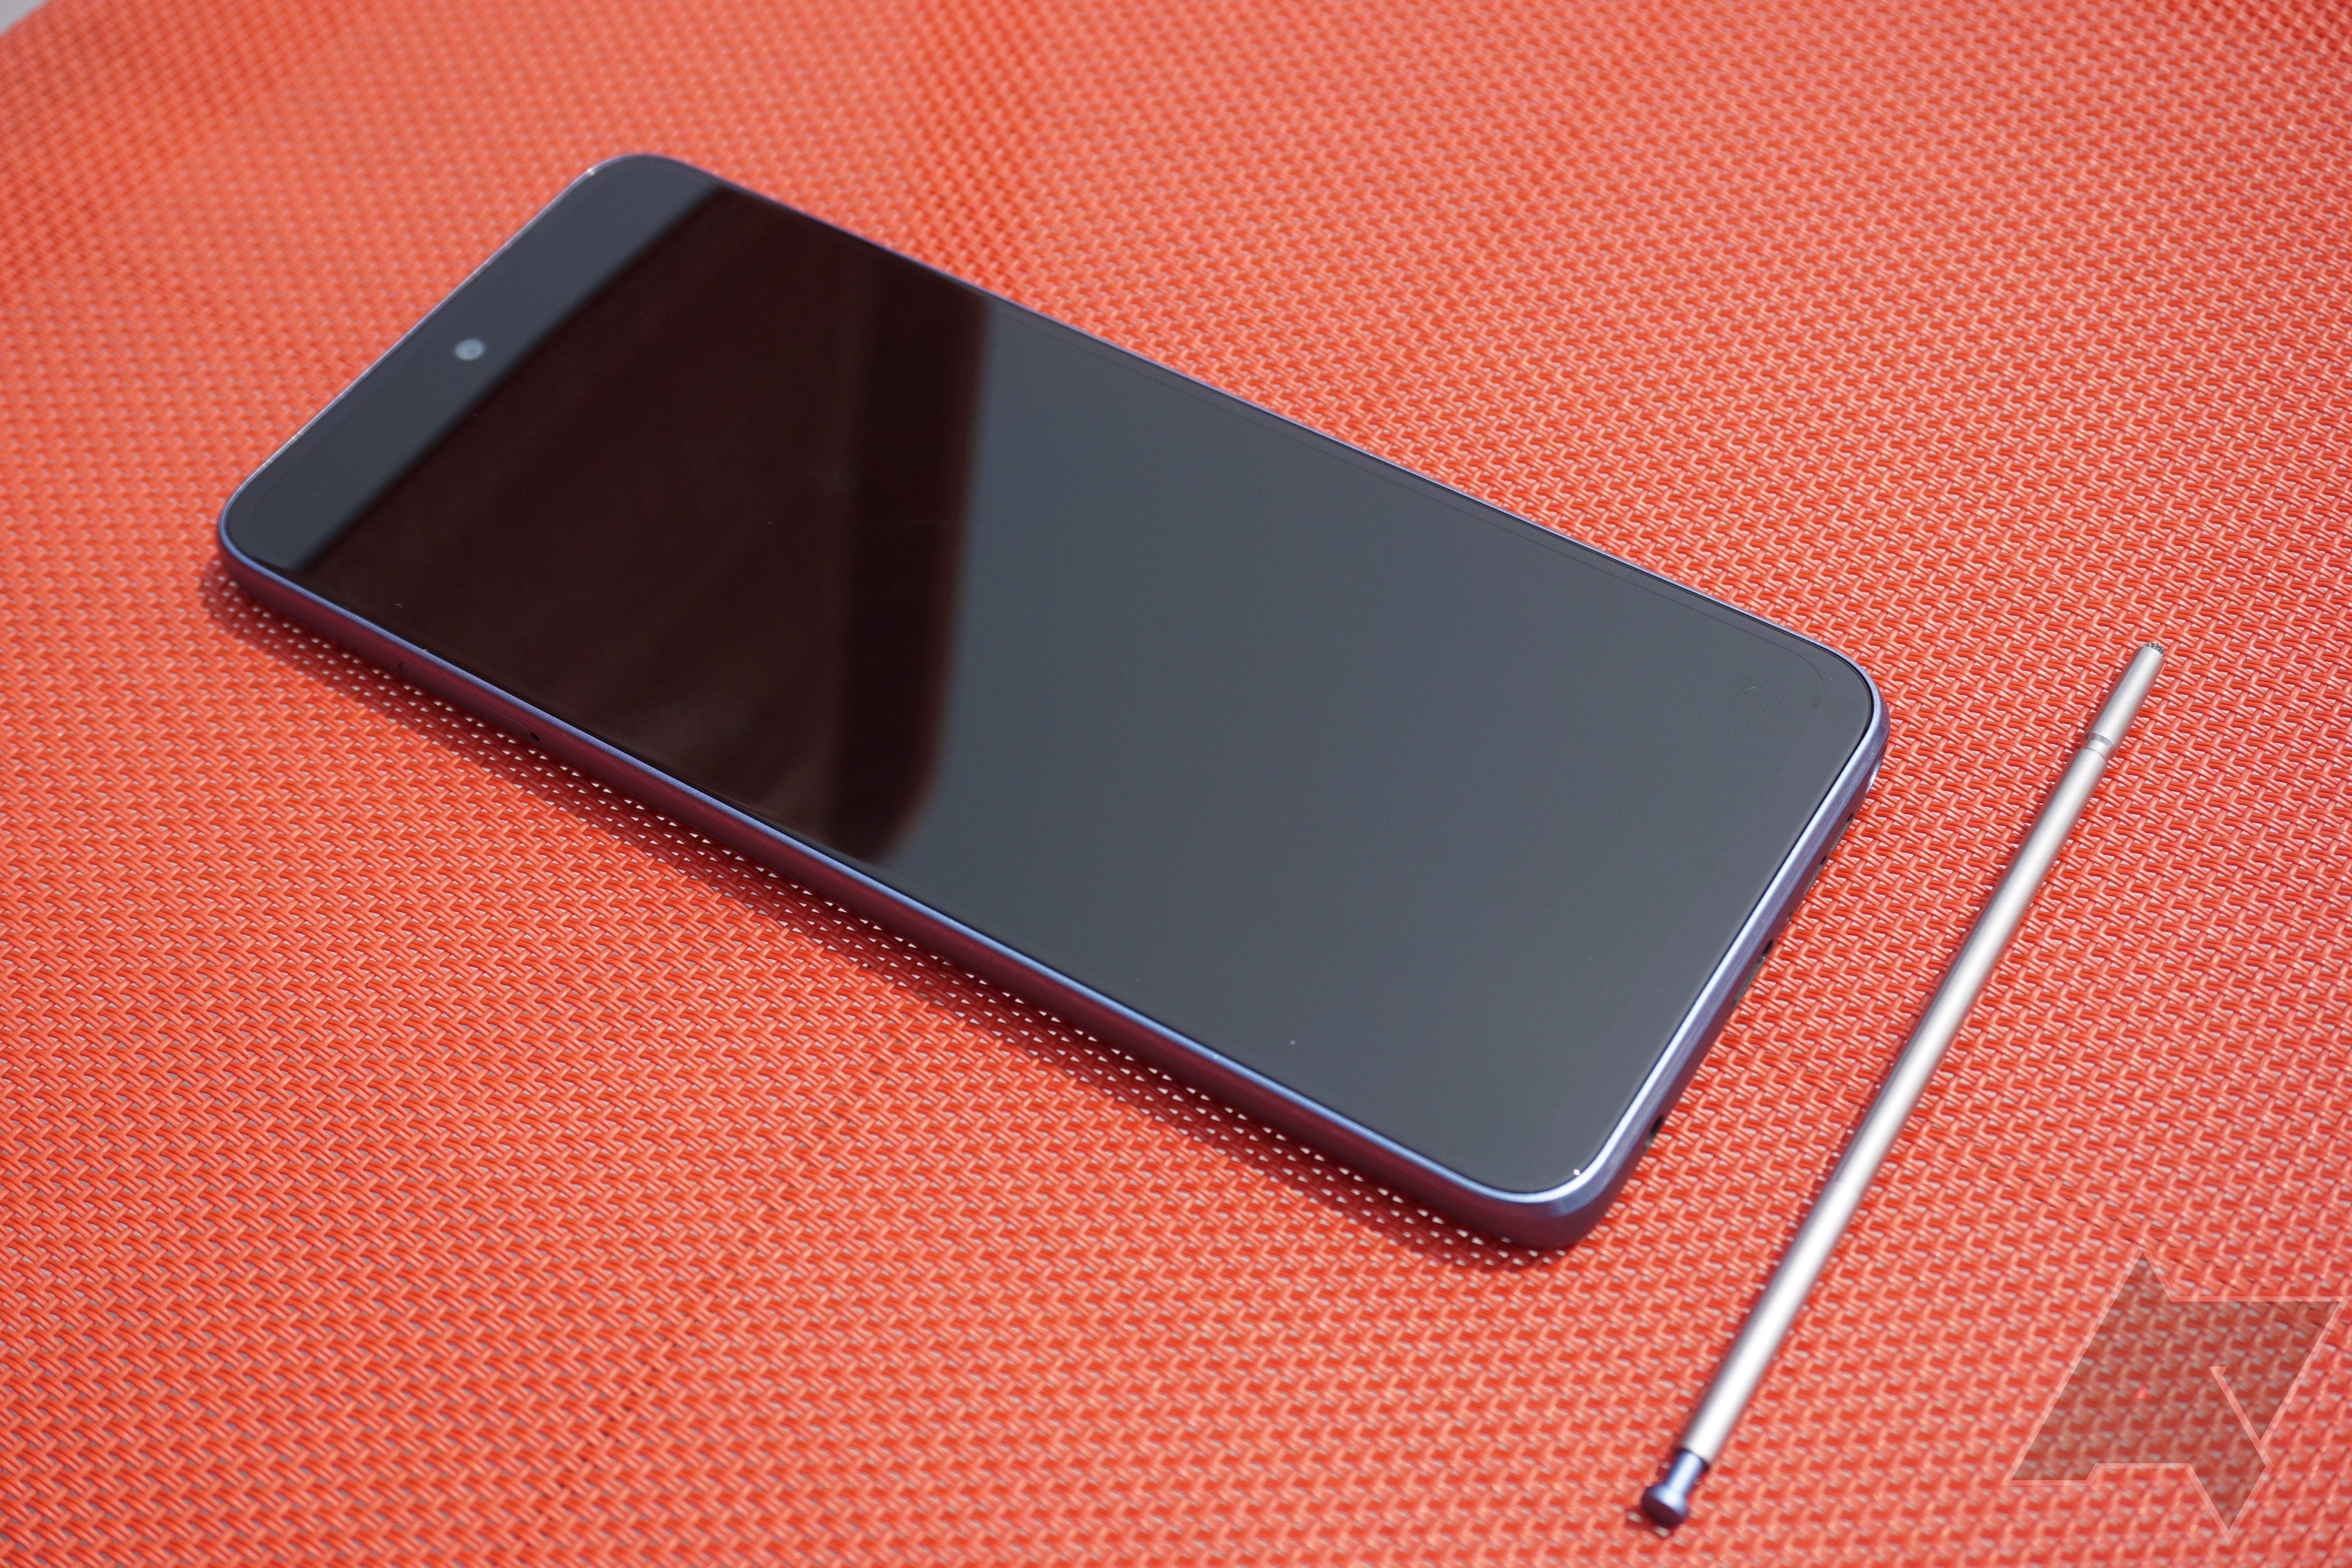 The front of the Moto G Stylus with the stylus next to it.